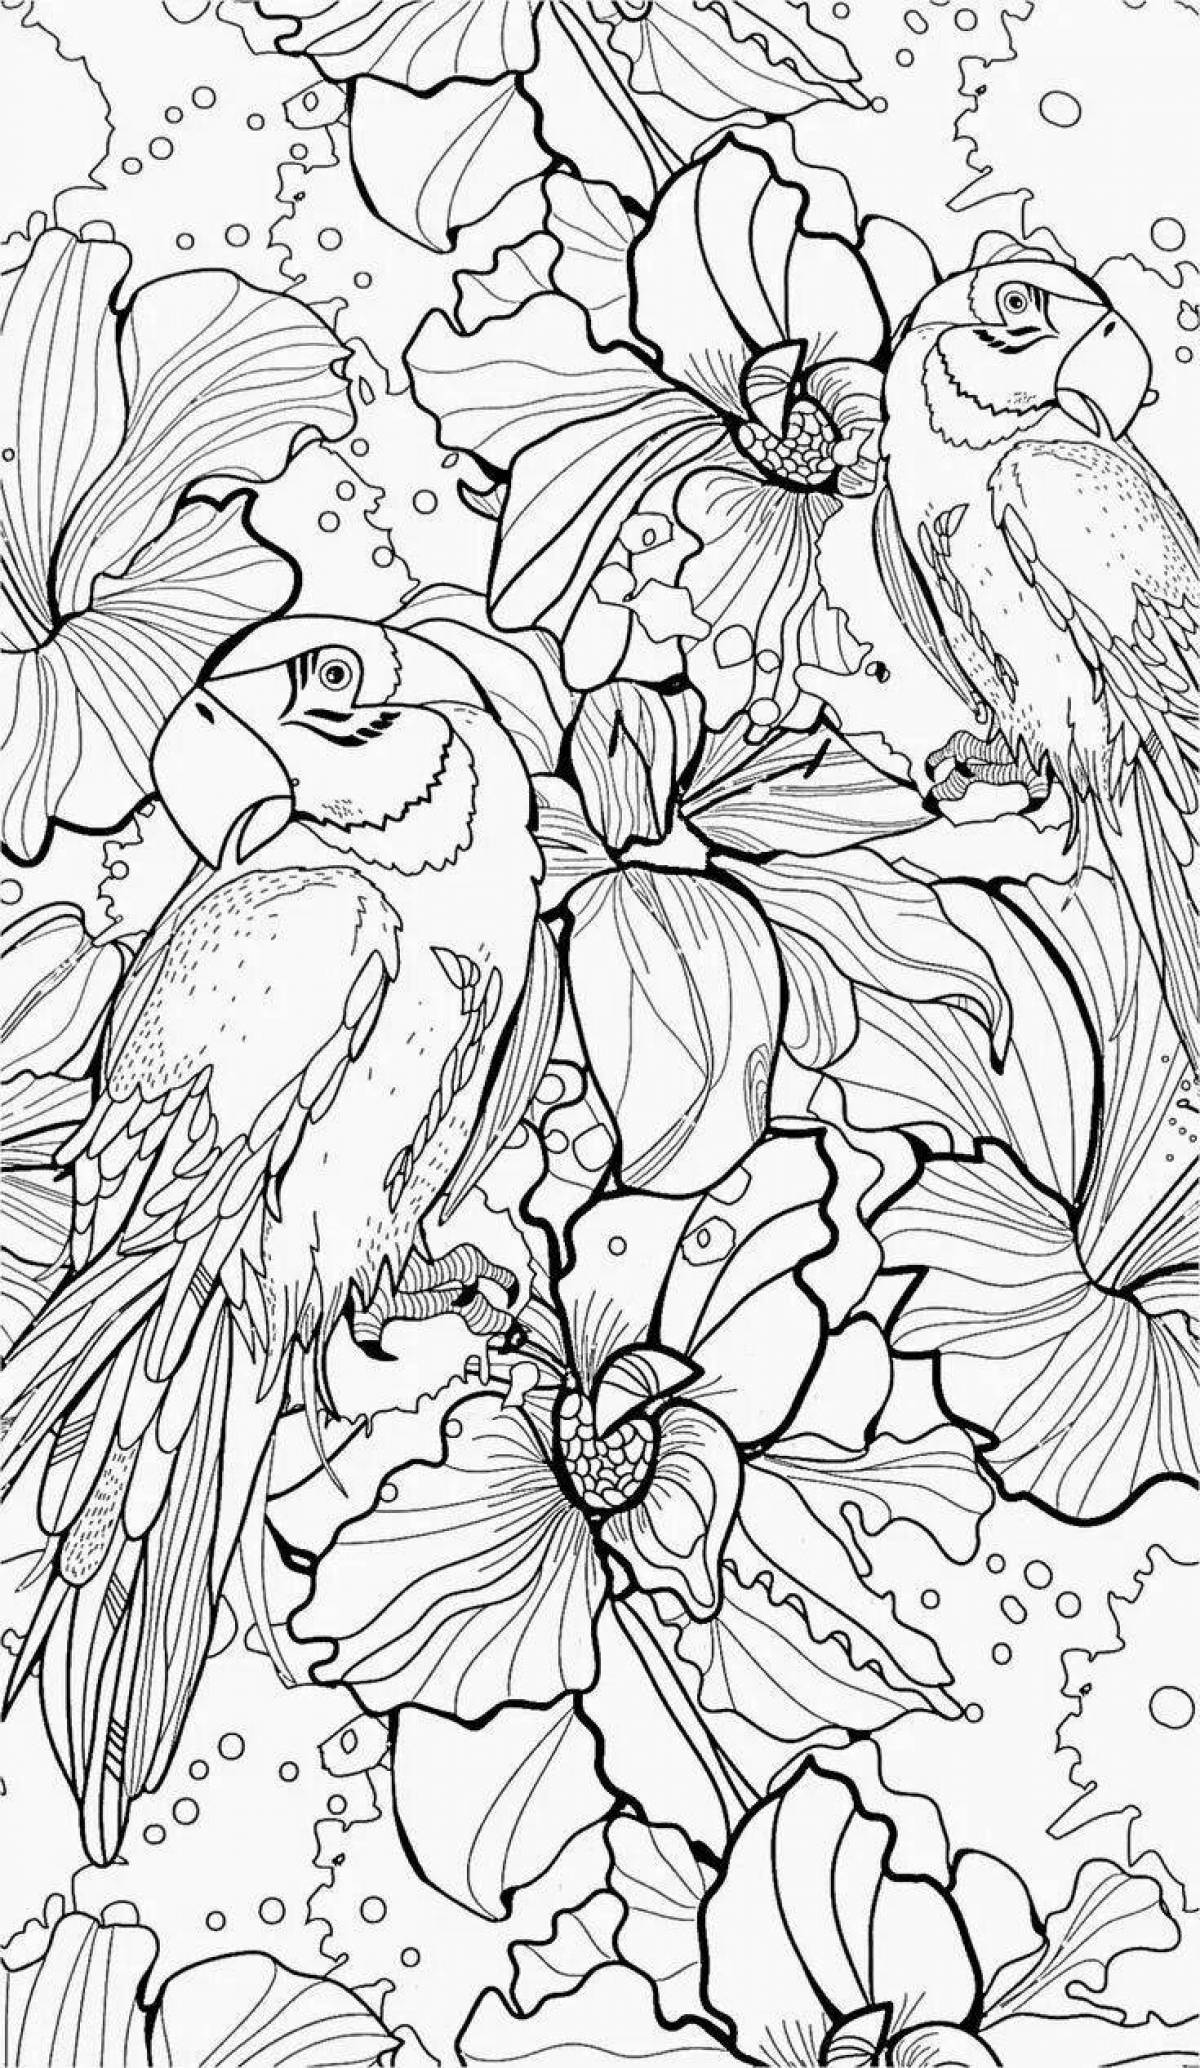 Inviting coloring by numbers for adults en antistress